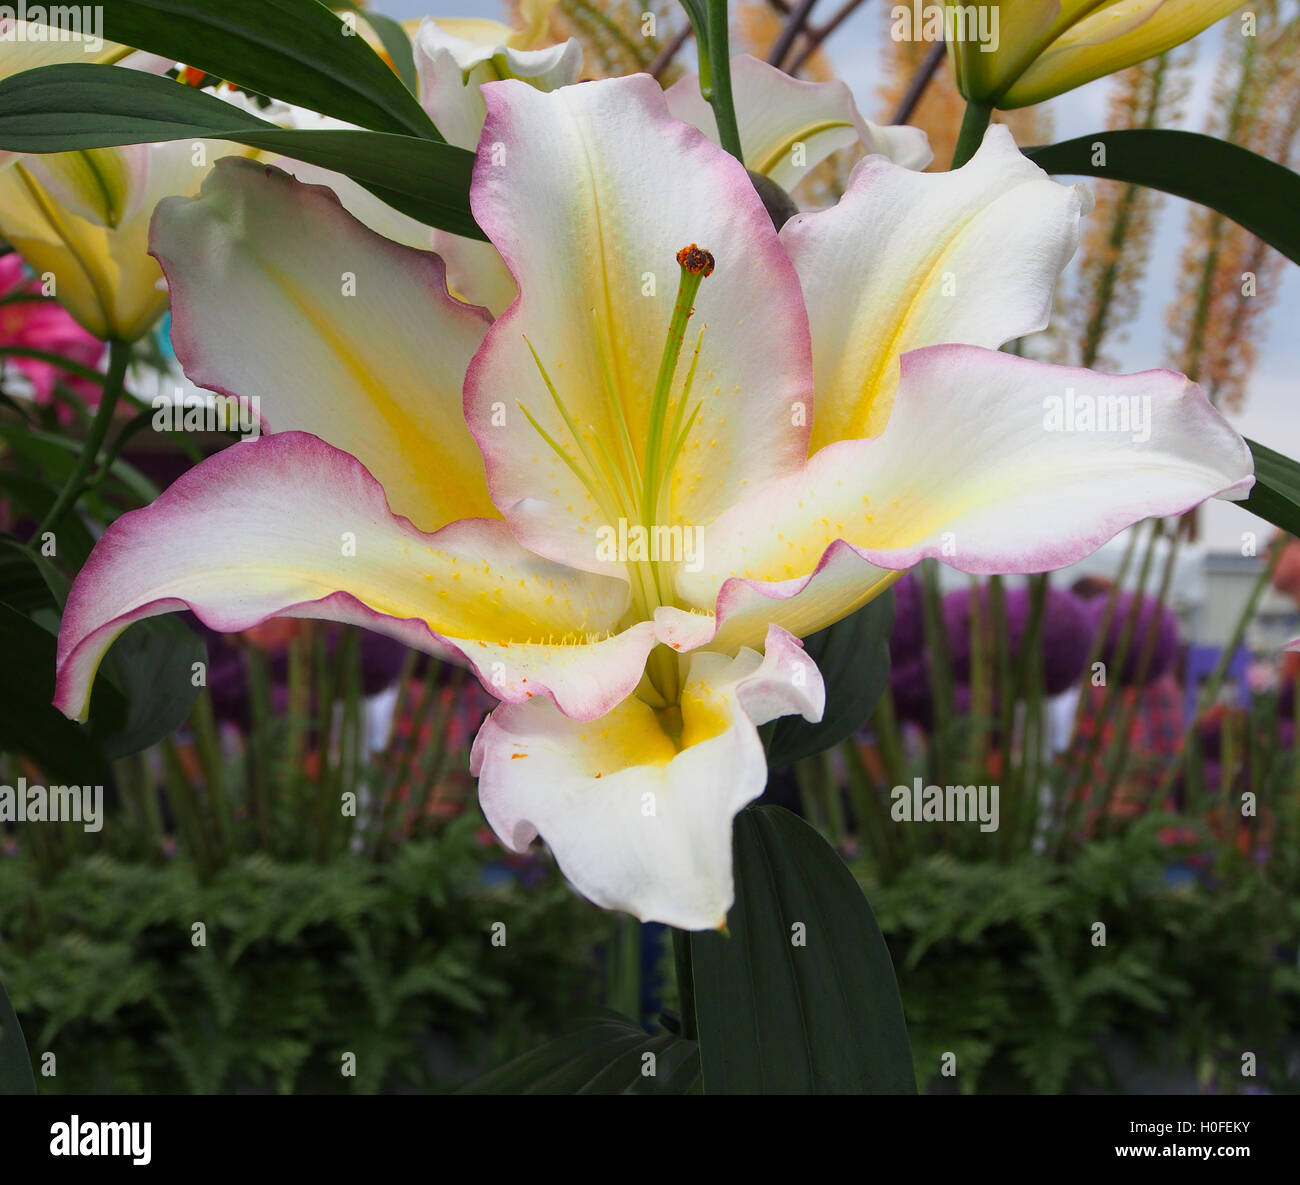 Close up shot of a single large oriental lily bloom, Lilium tricolore. Stock Photo